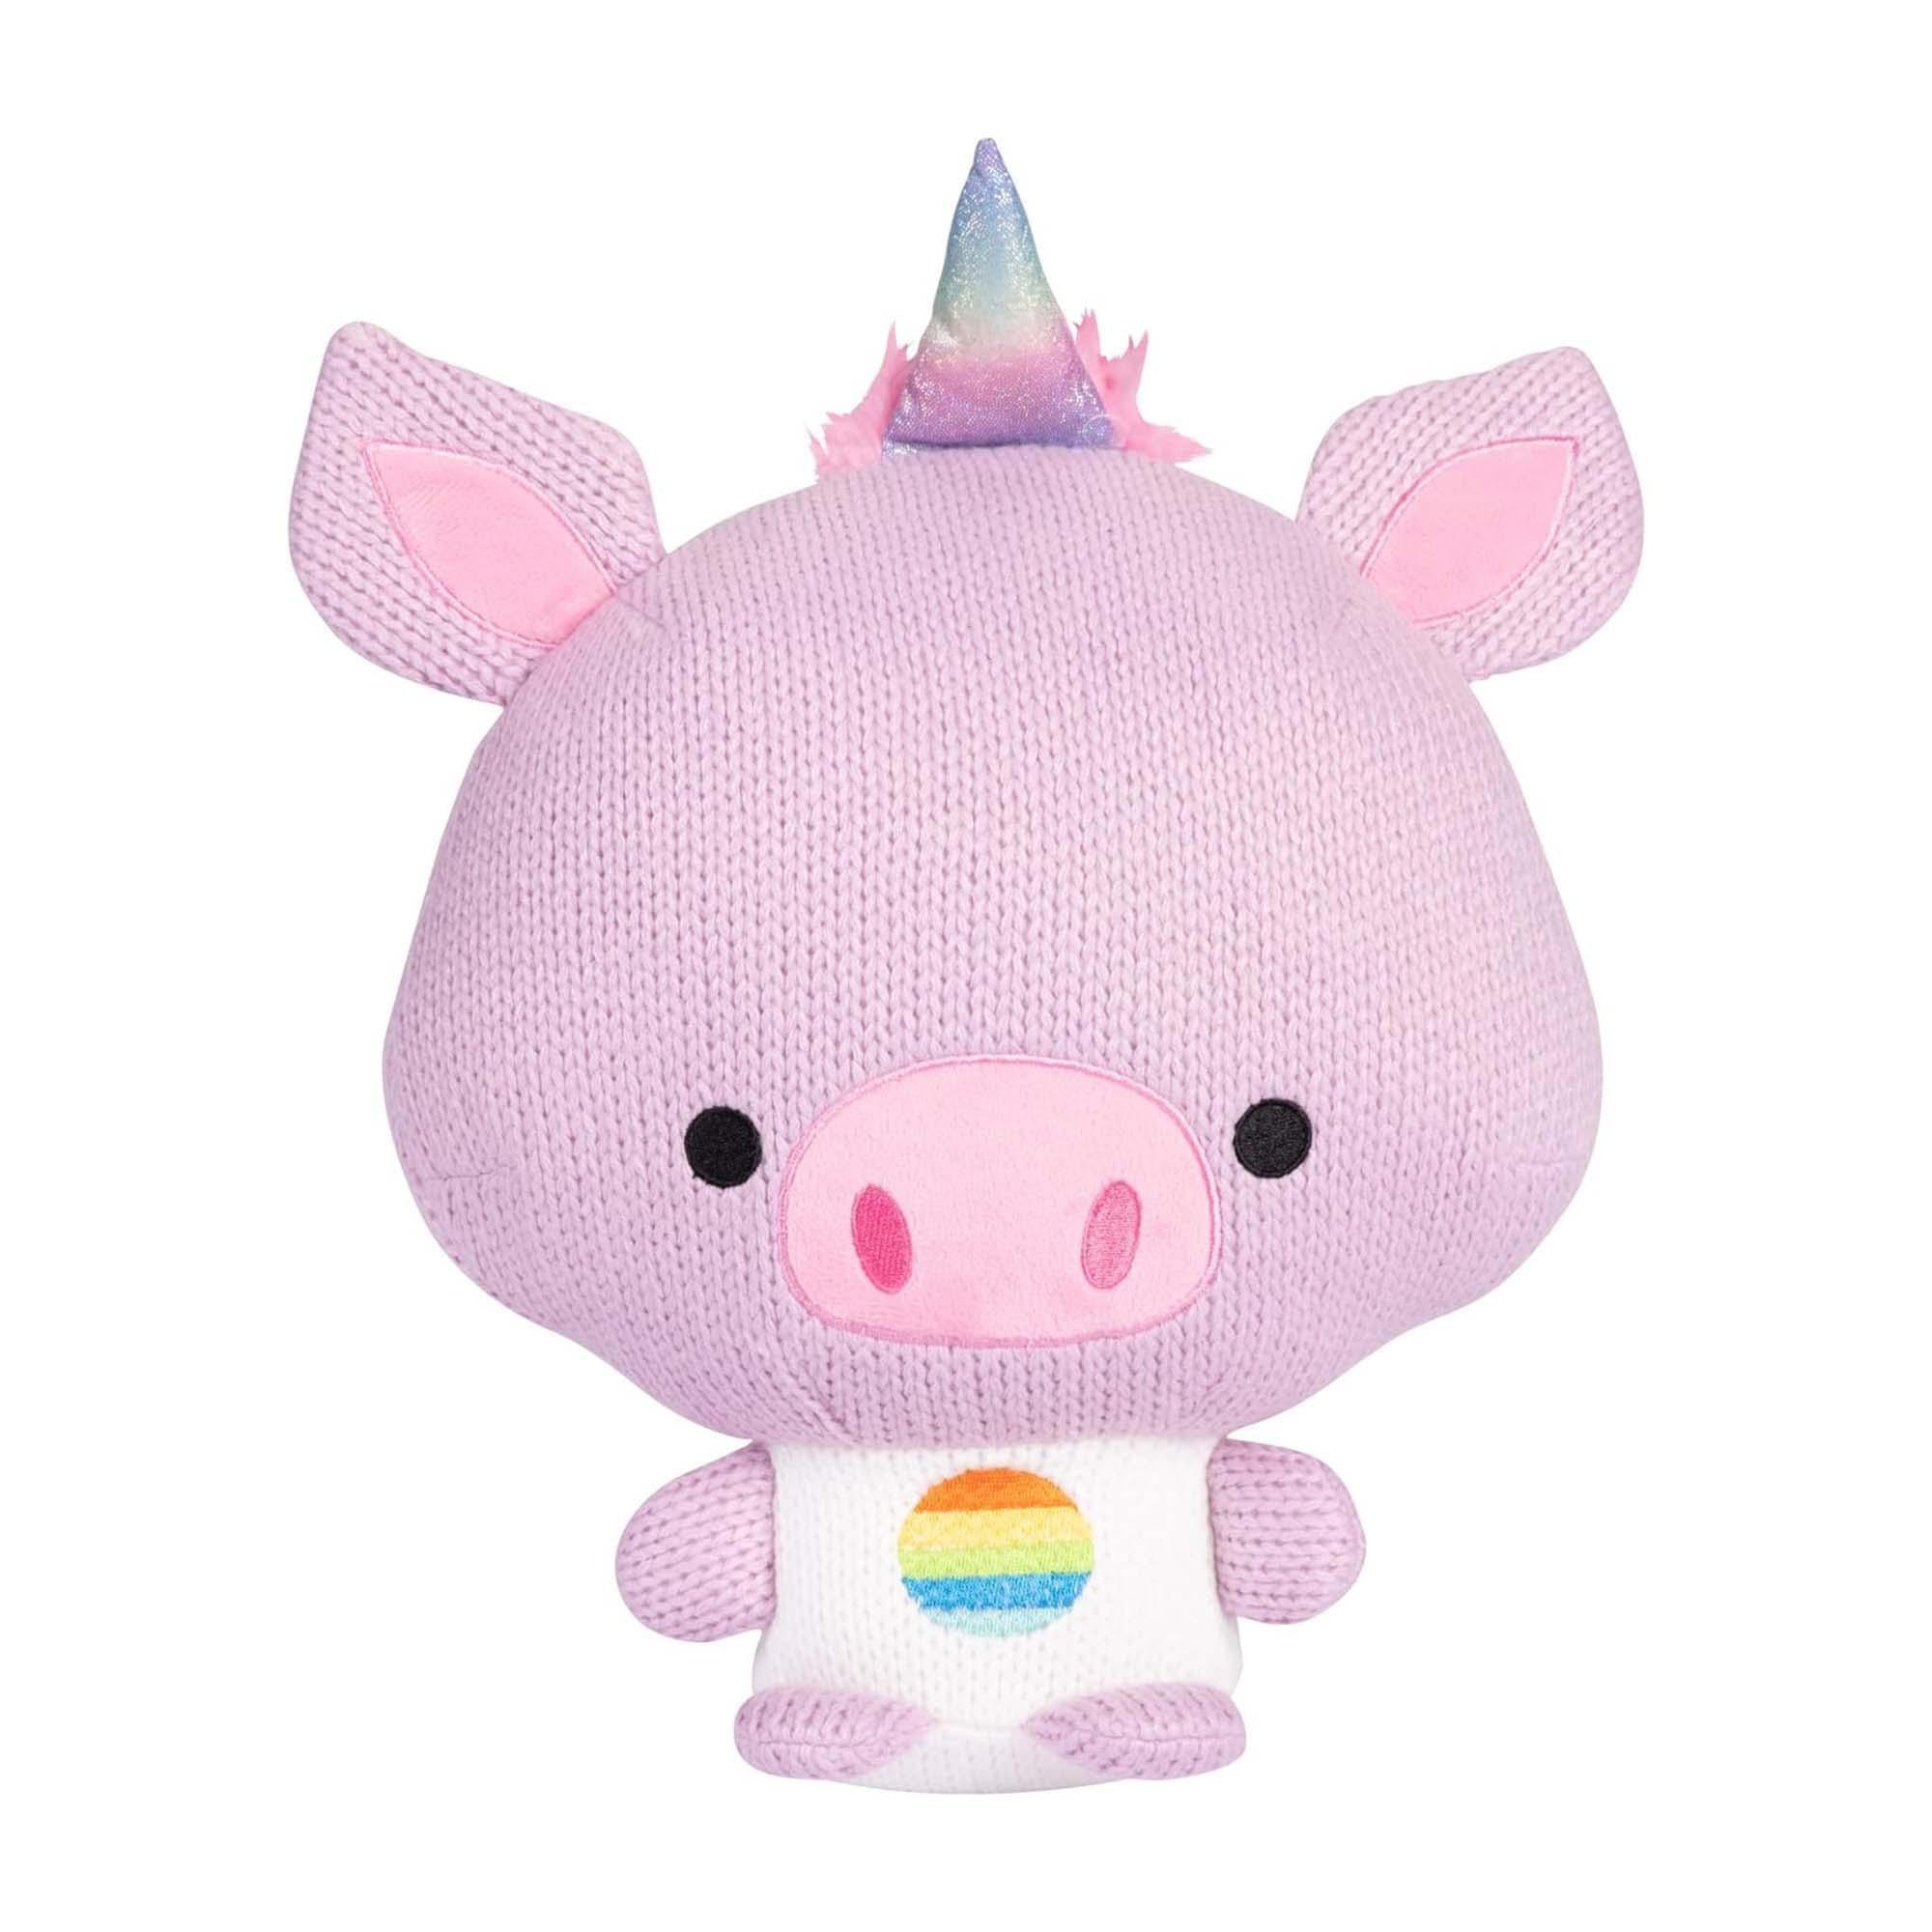 Ami Amis Jumbo Pig 10-in Collectible Plush